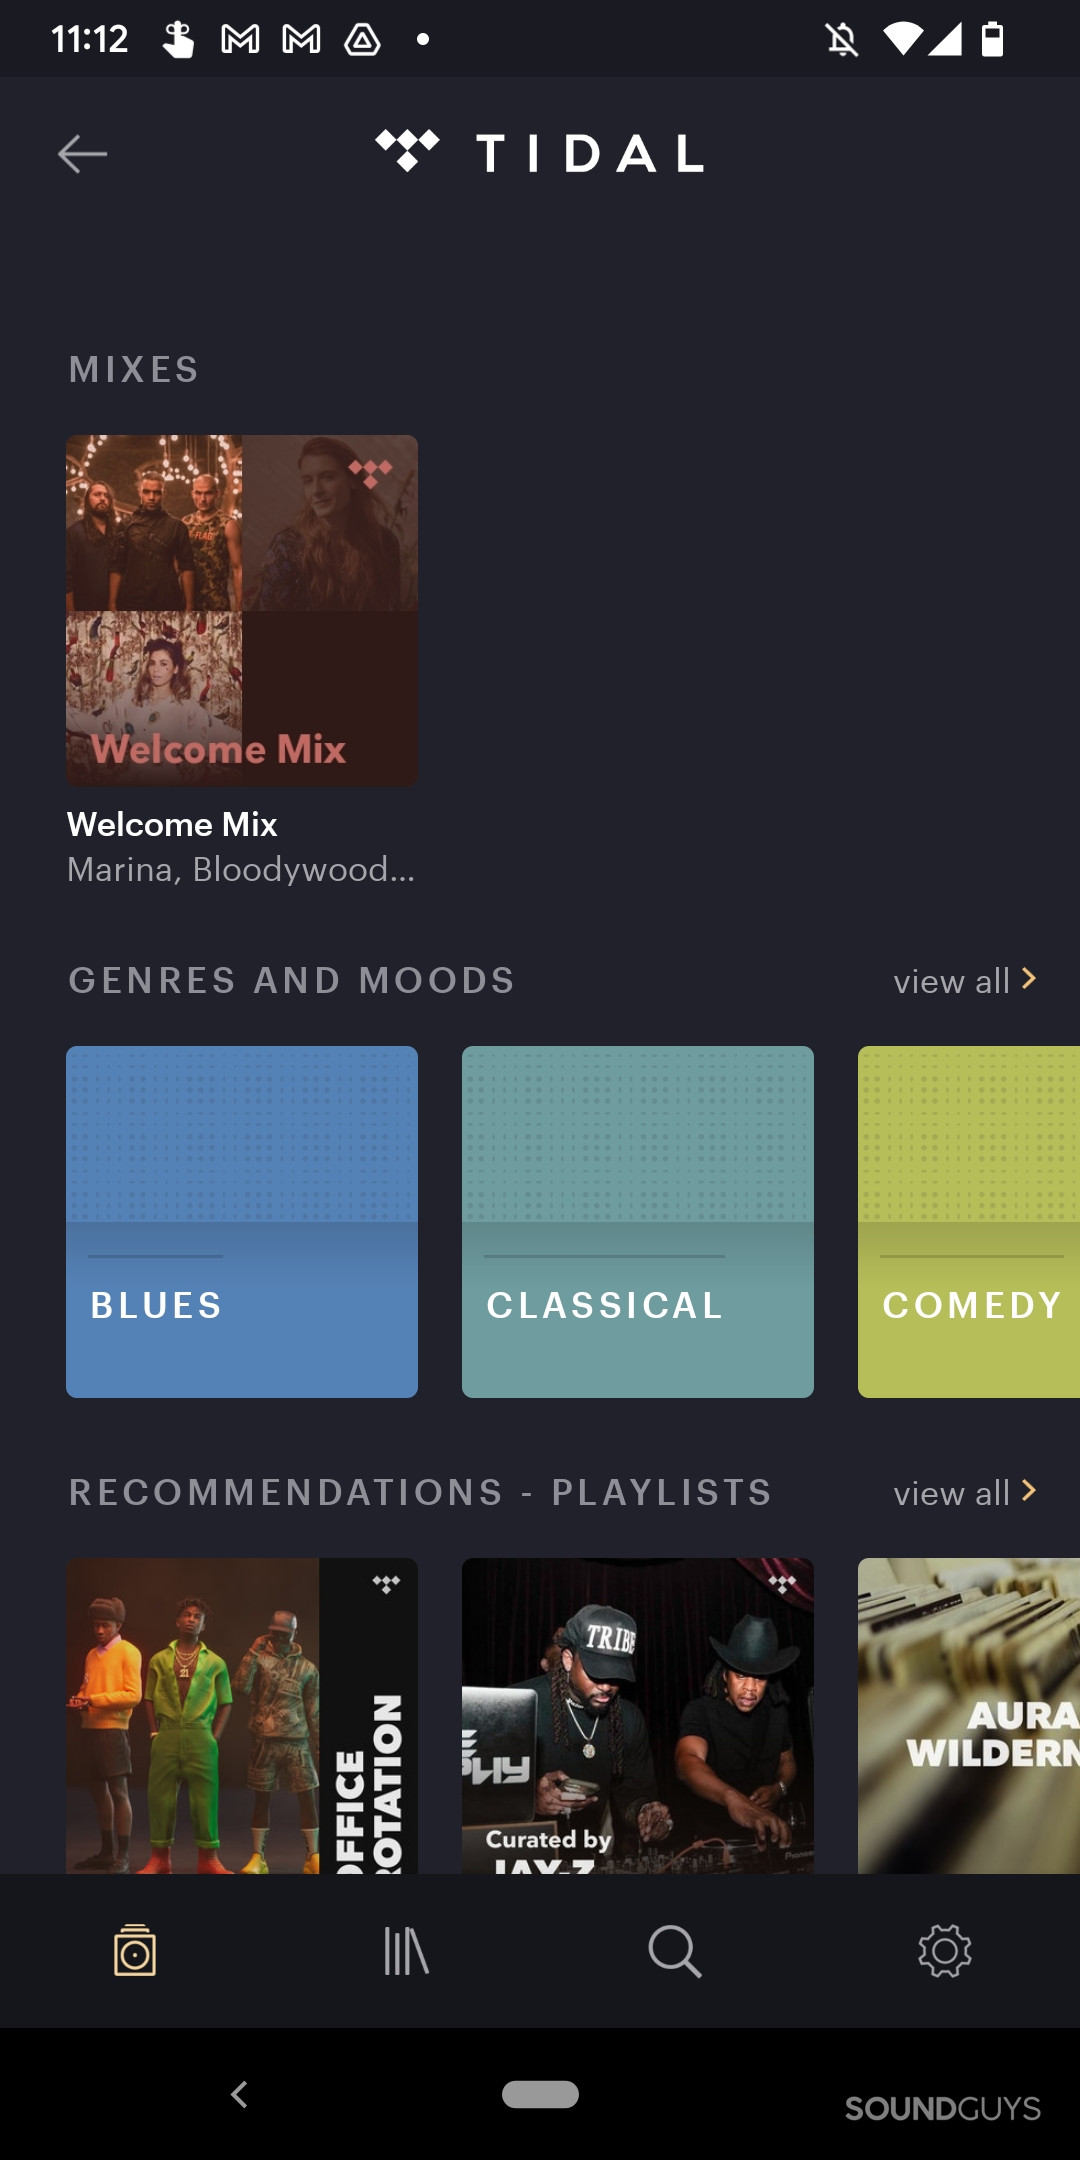 A screenshot of the Bowers & Wilkins Music app showing the Tidal streaming service page wth various genres available to explore in colored sqaures and a pre-made playlist called 'Welcome Mix'.